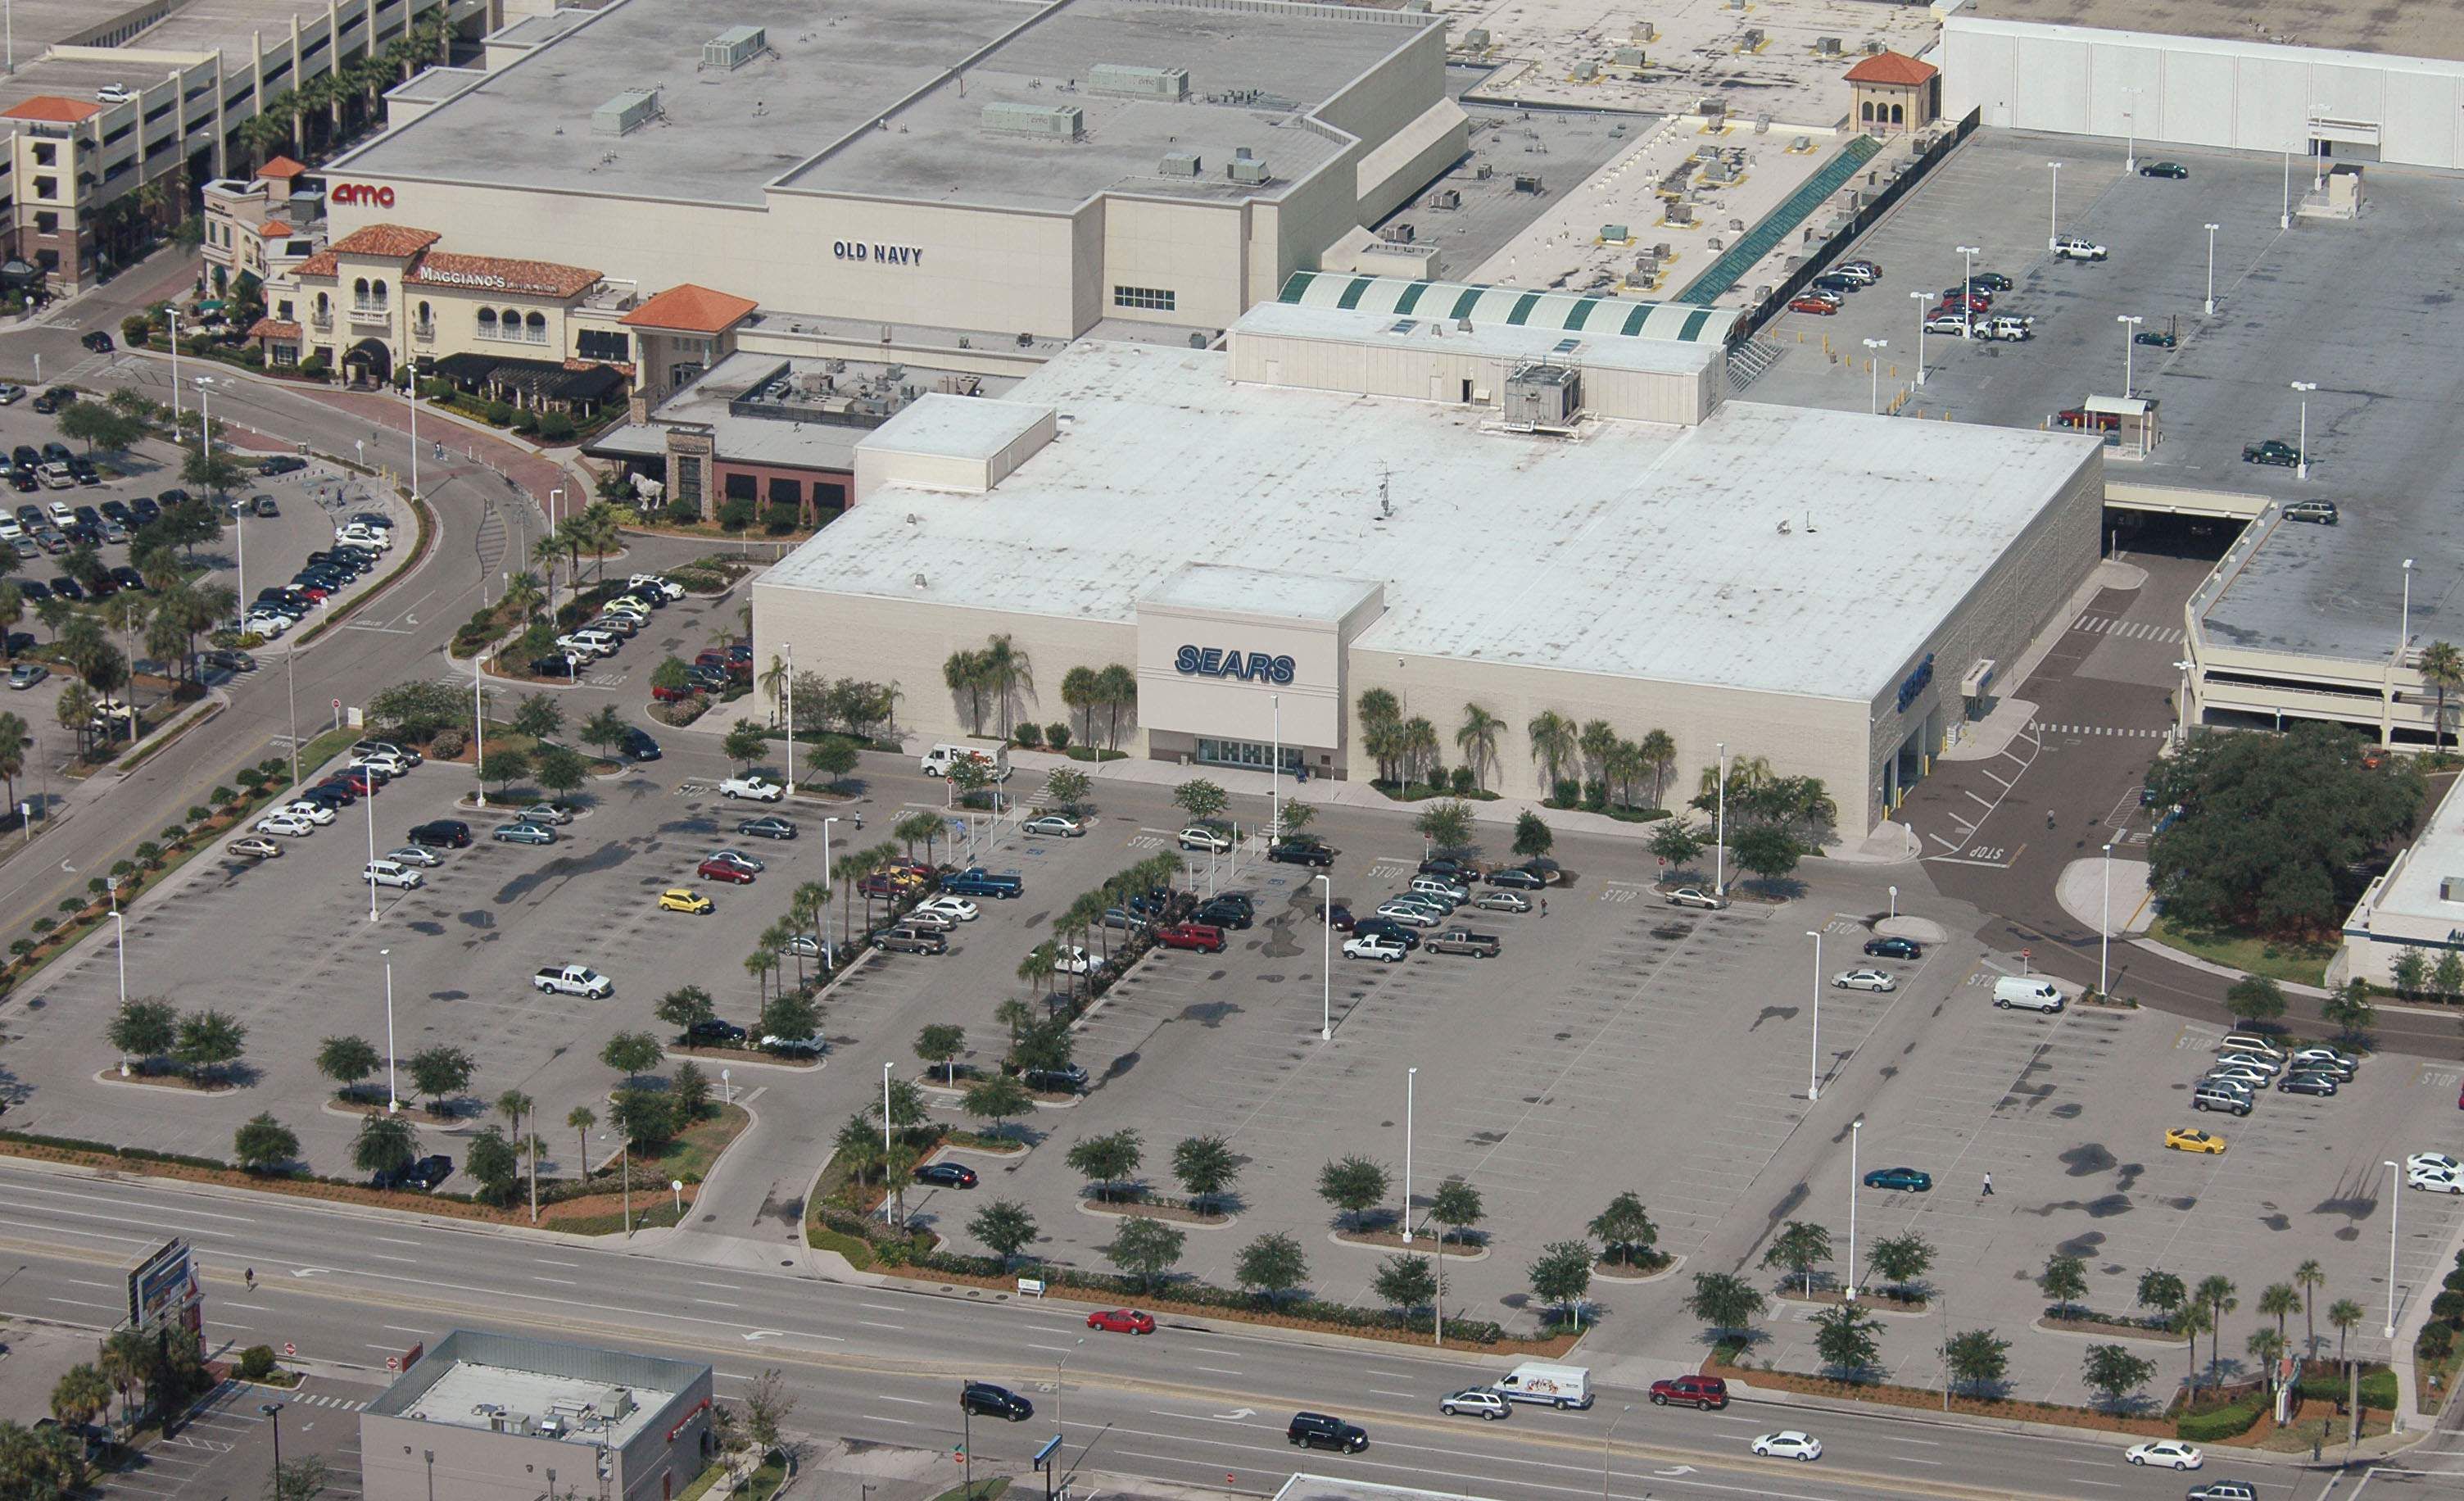 WestShore Plaza owners buy $4.3 million in land as part of new mixed-use  development plan